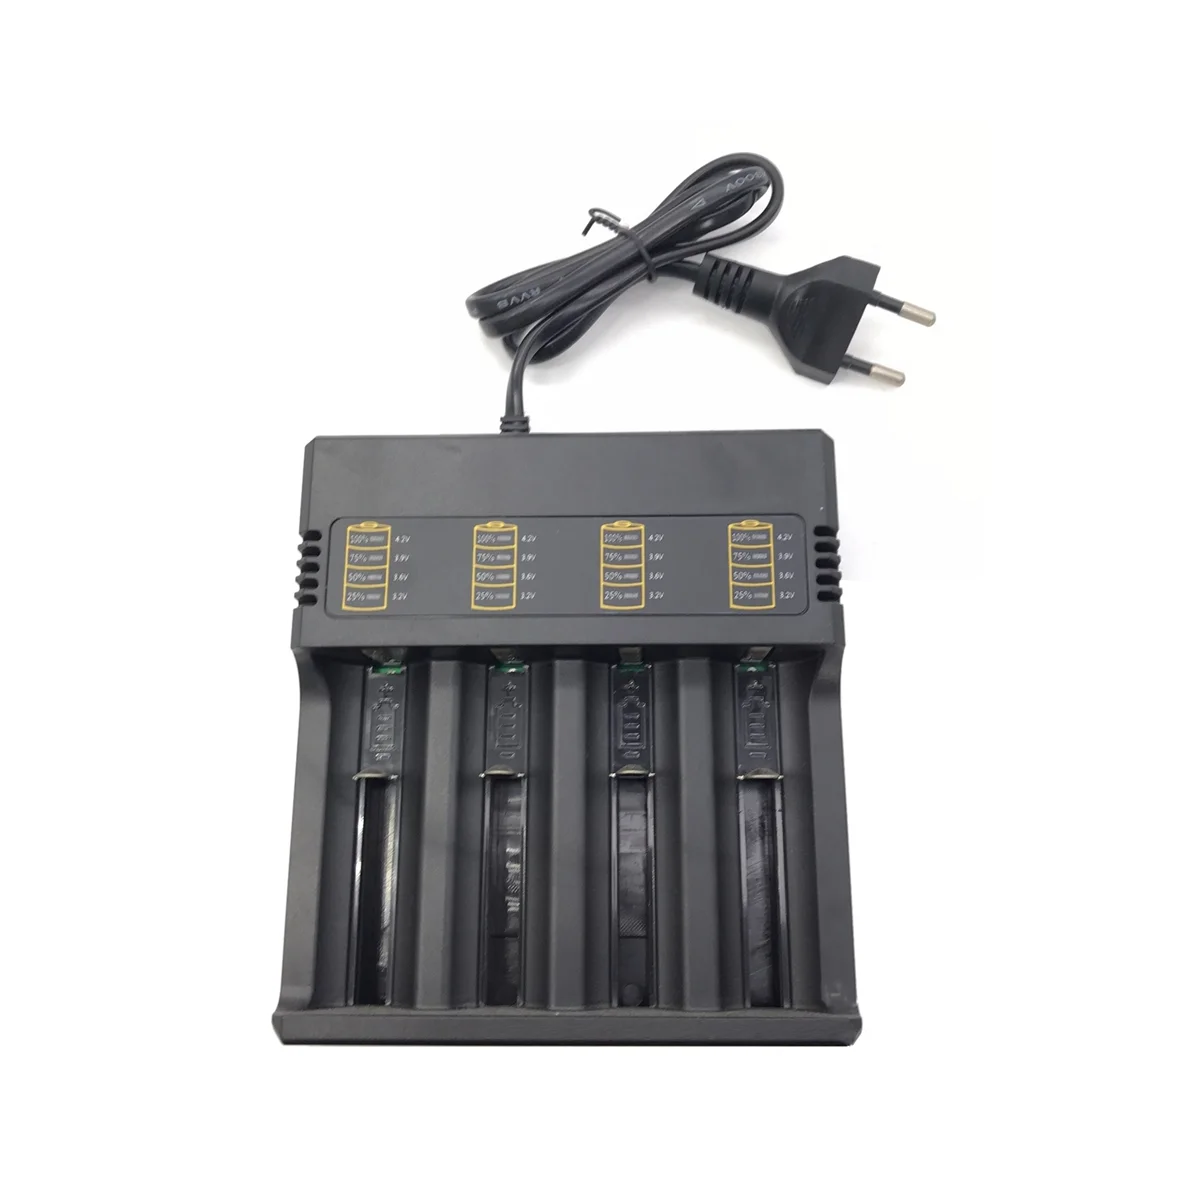 

1Pcs 4 Slots 18650 Battery Charger, Charging for 3.7V 18650 26650 21700 14500 16340 Rechargeable Lithium Battery EU Plug